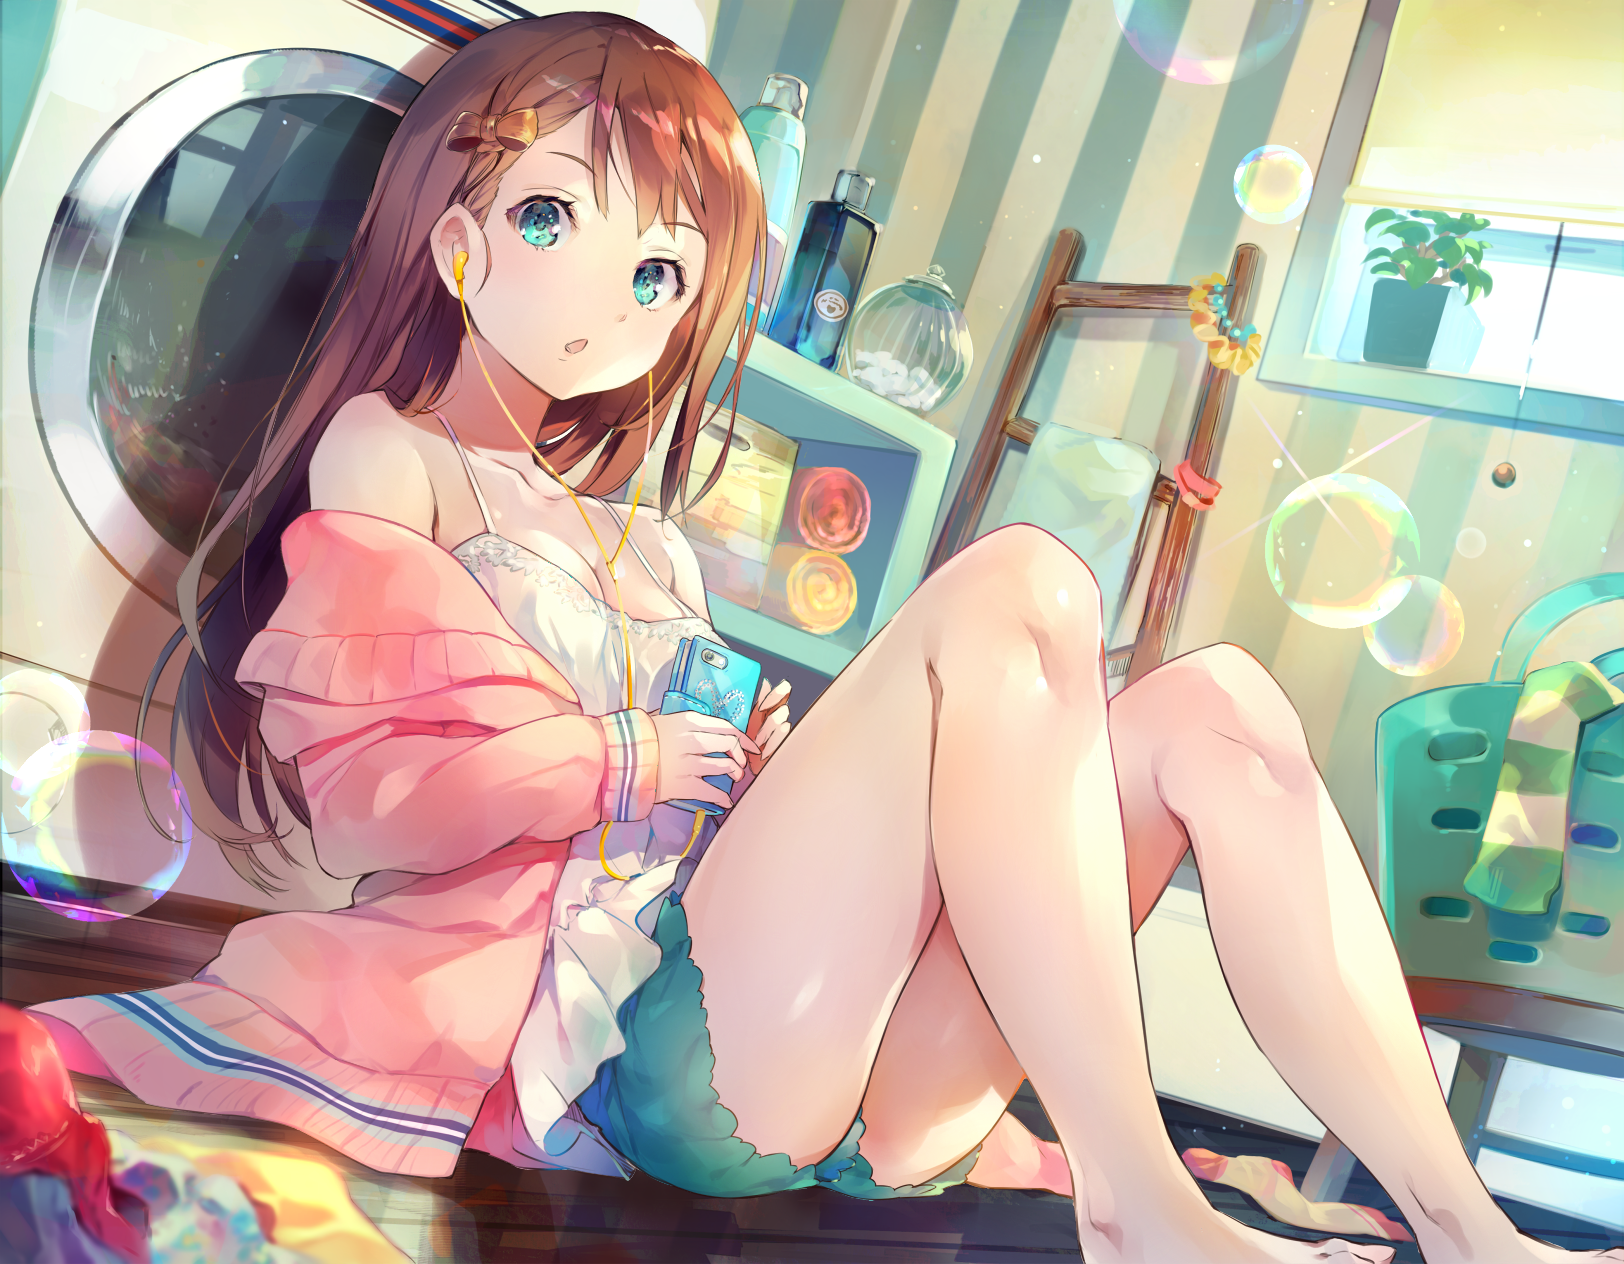 Anime 1624x1264 anime girls original characters brunette long hair hair ornament hair bows bangs blue eyes looking at viewer open mouth earphones cellphone tank top sweater short shorts barefoot sitting bubbles laundry indoors artwork 2D drawing digital art anime